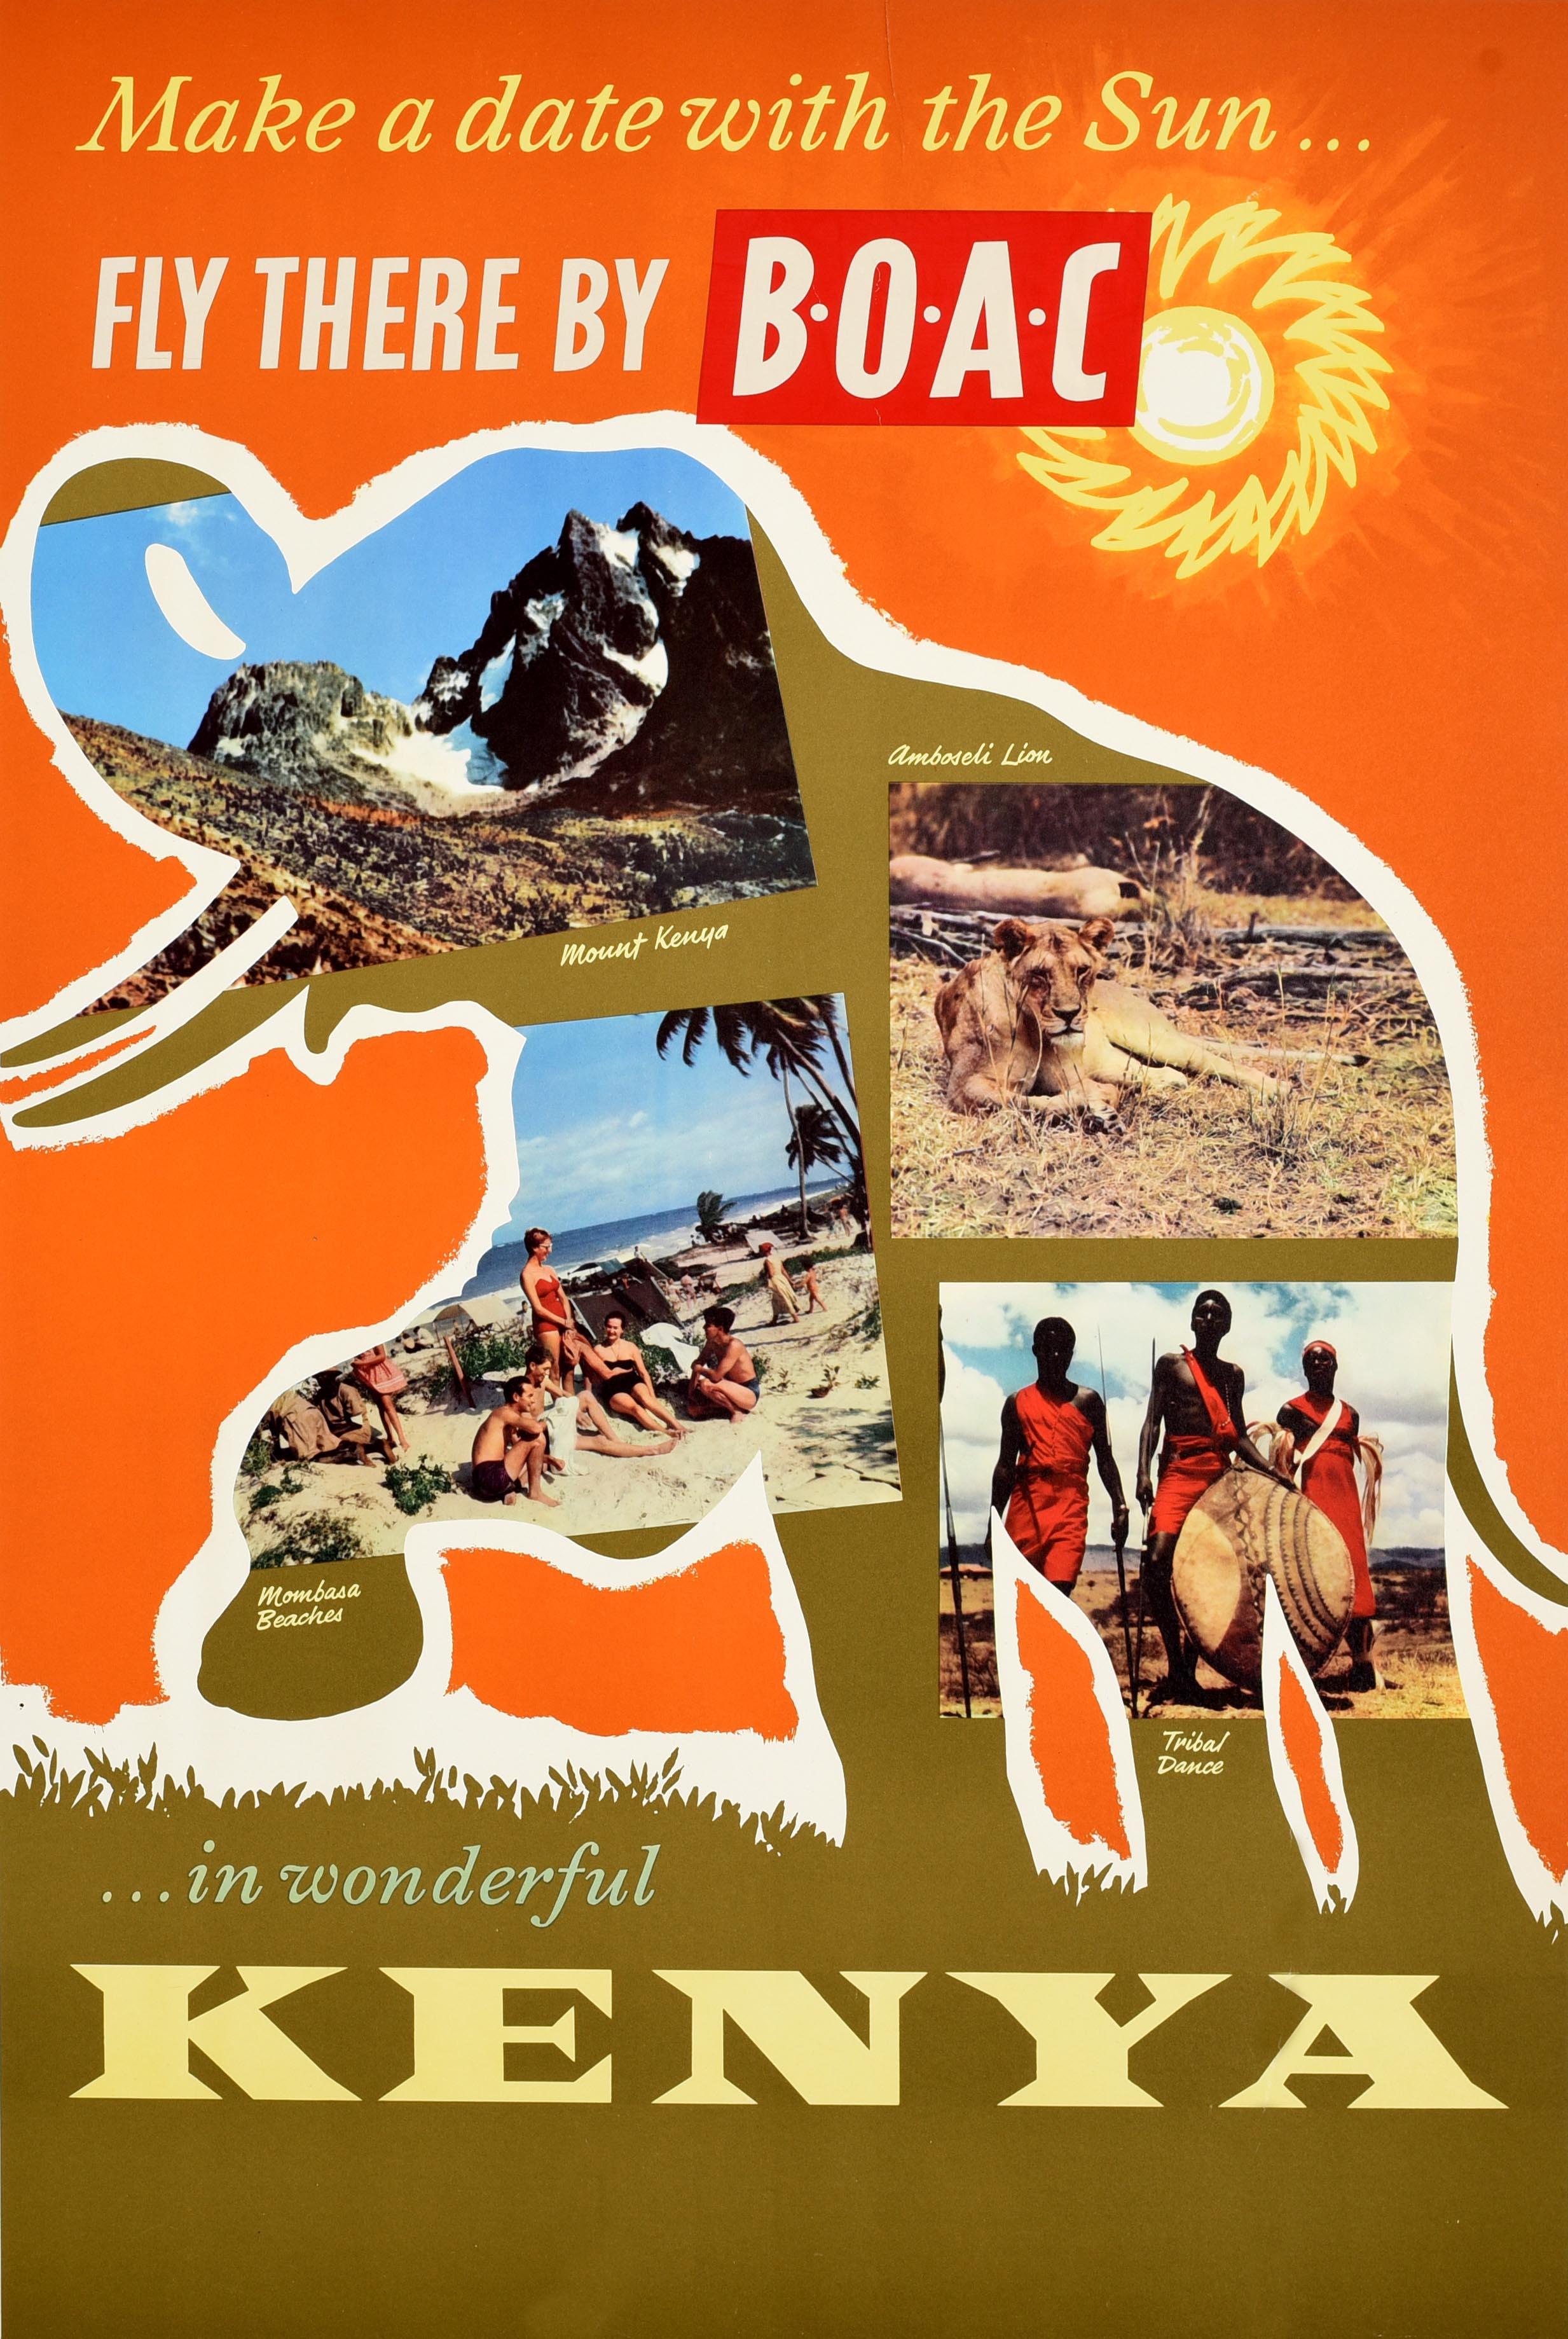 Unknown Print - Original Vintage Poster Make A Date With The Sun In Wonderful Kenya BOAC Travel